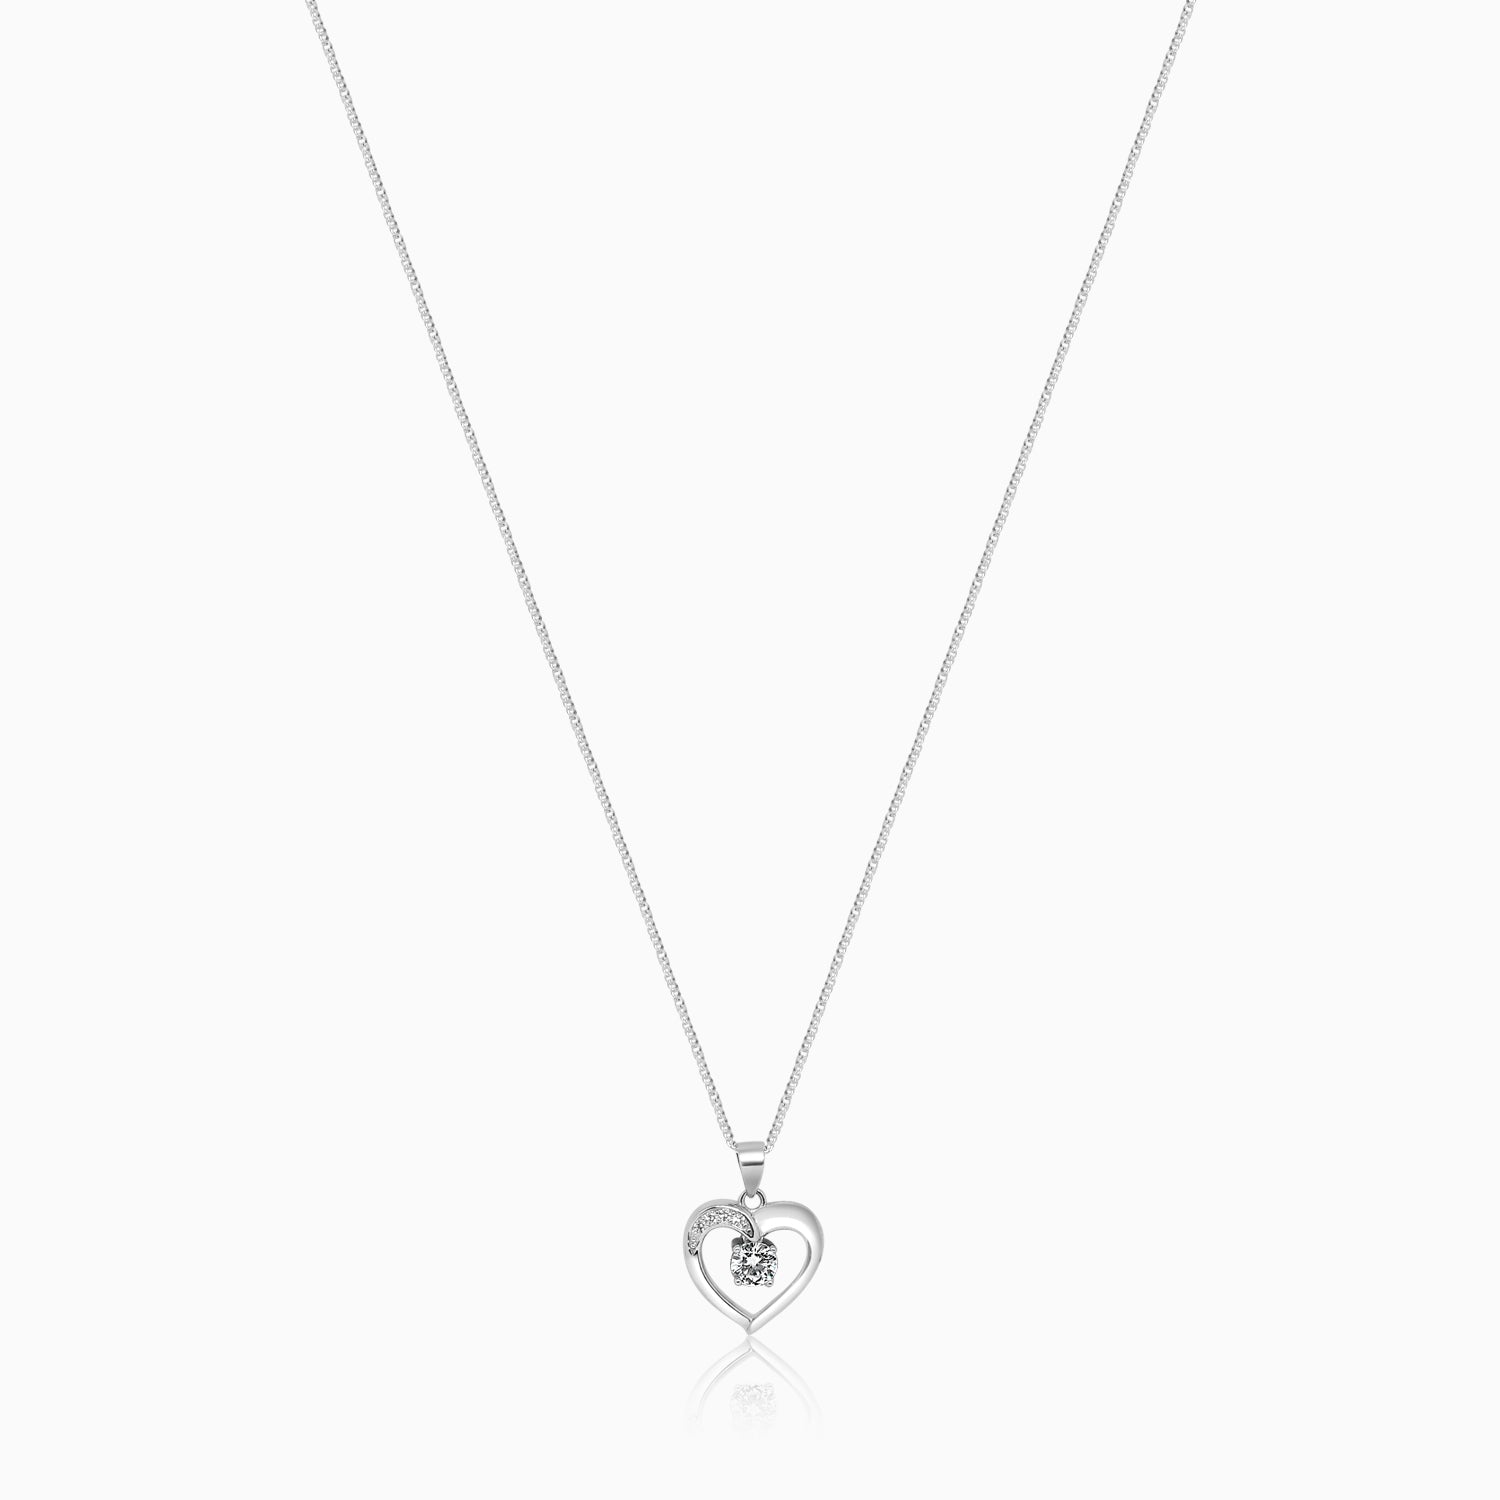 Silver Dangling Solitaire in Sparkling Heart Edge Pendant